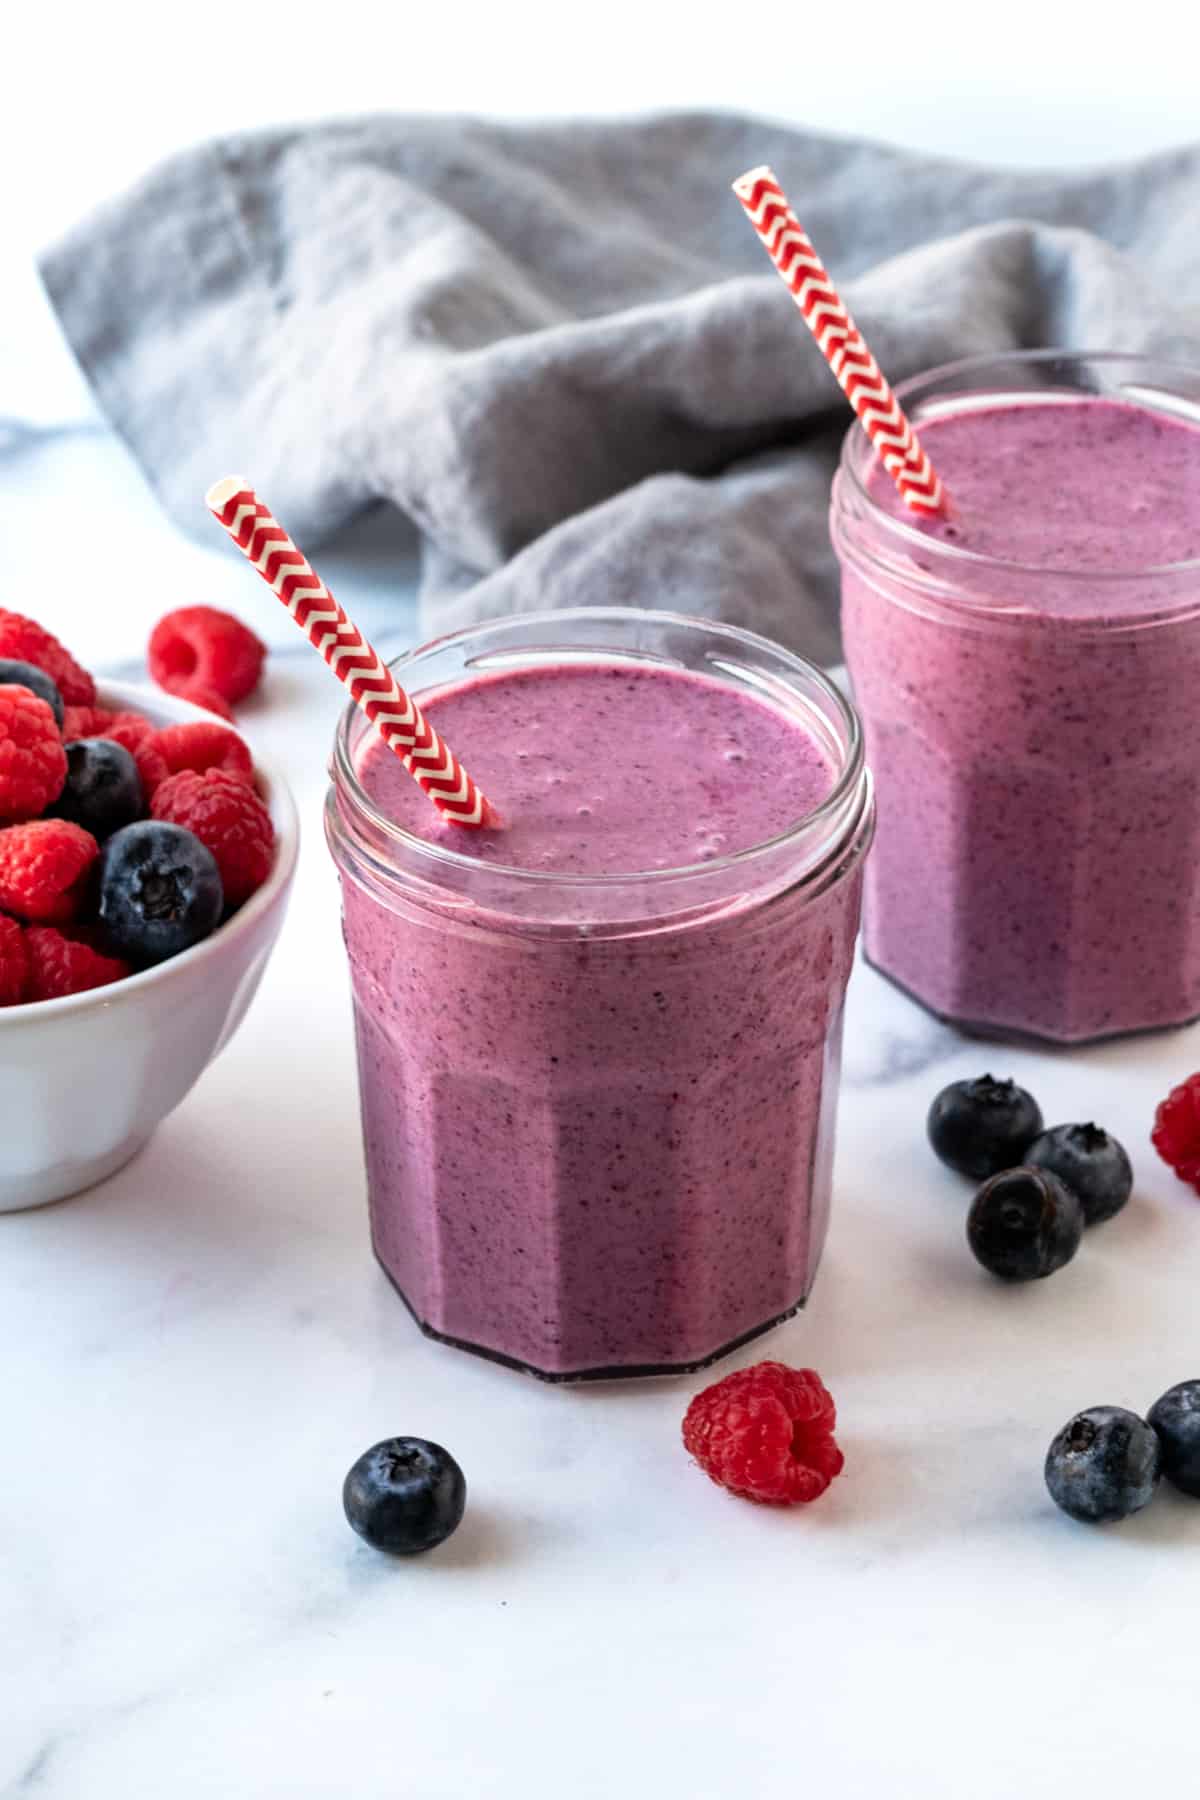 Two blueberry raspberry smoothies in glasses with straws.